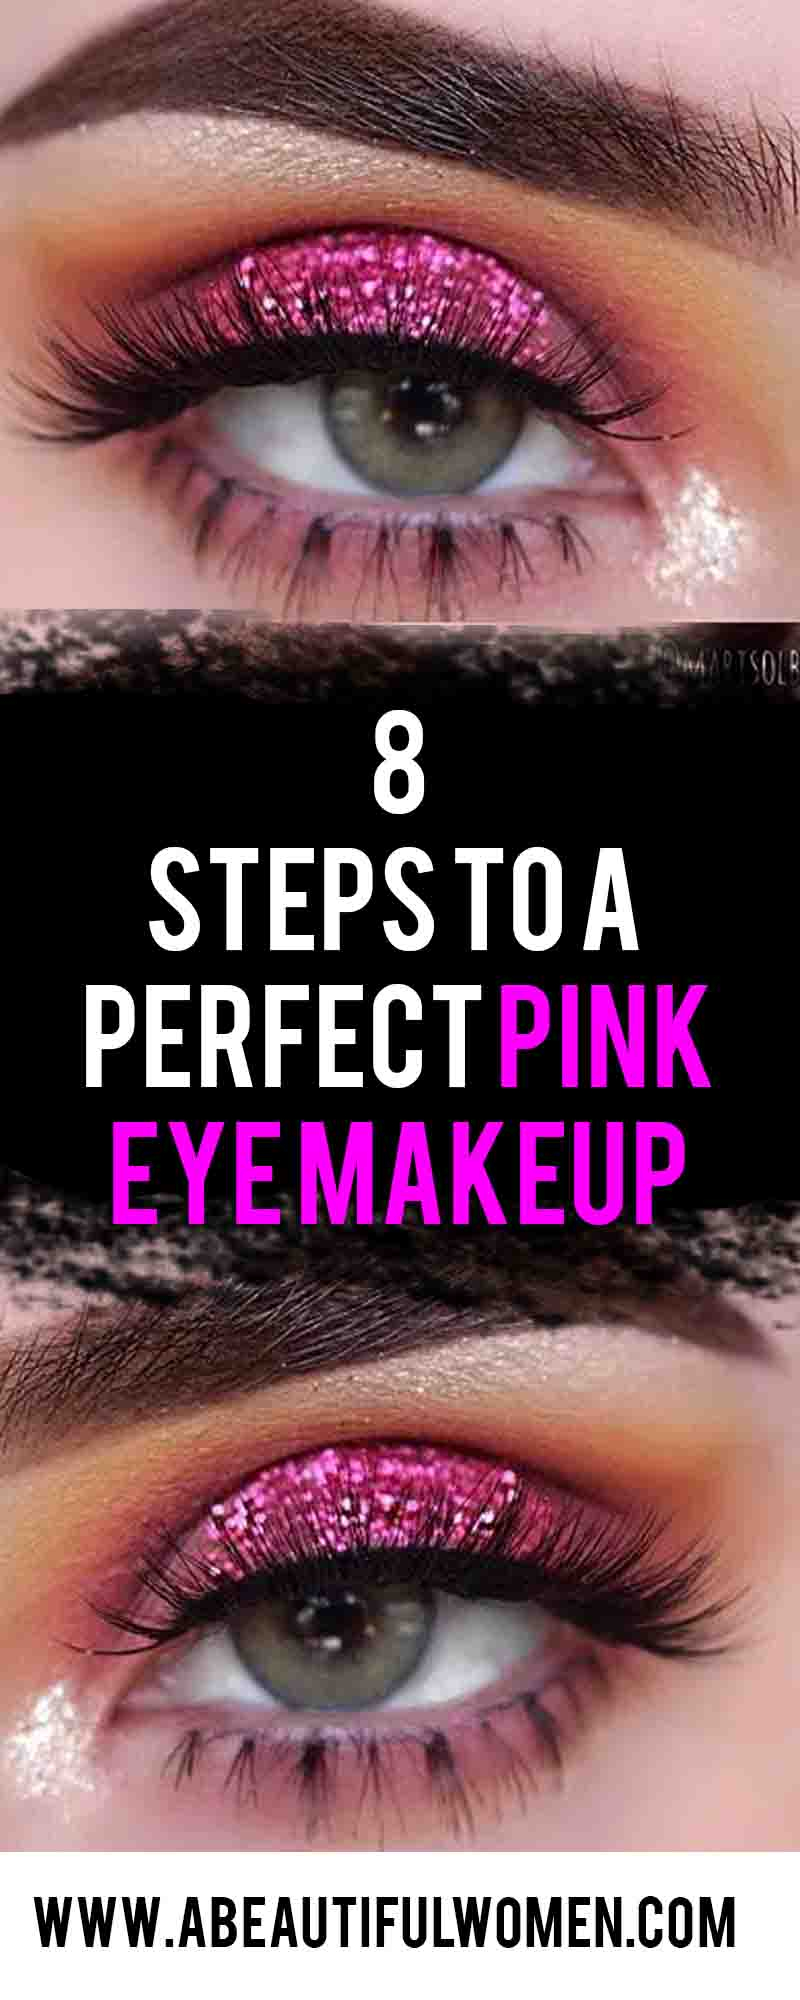 How To Do Perfect Eye Makeup 8 Steps To A Perfect Pink Eye Makeup Abeautiful Women